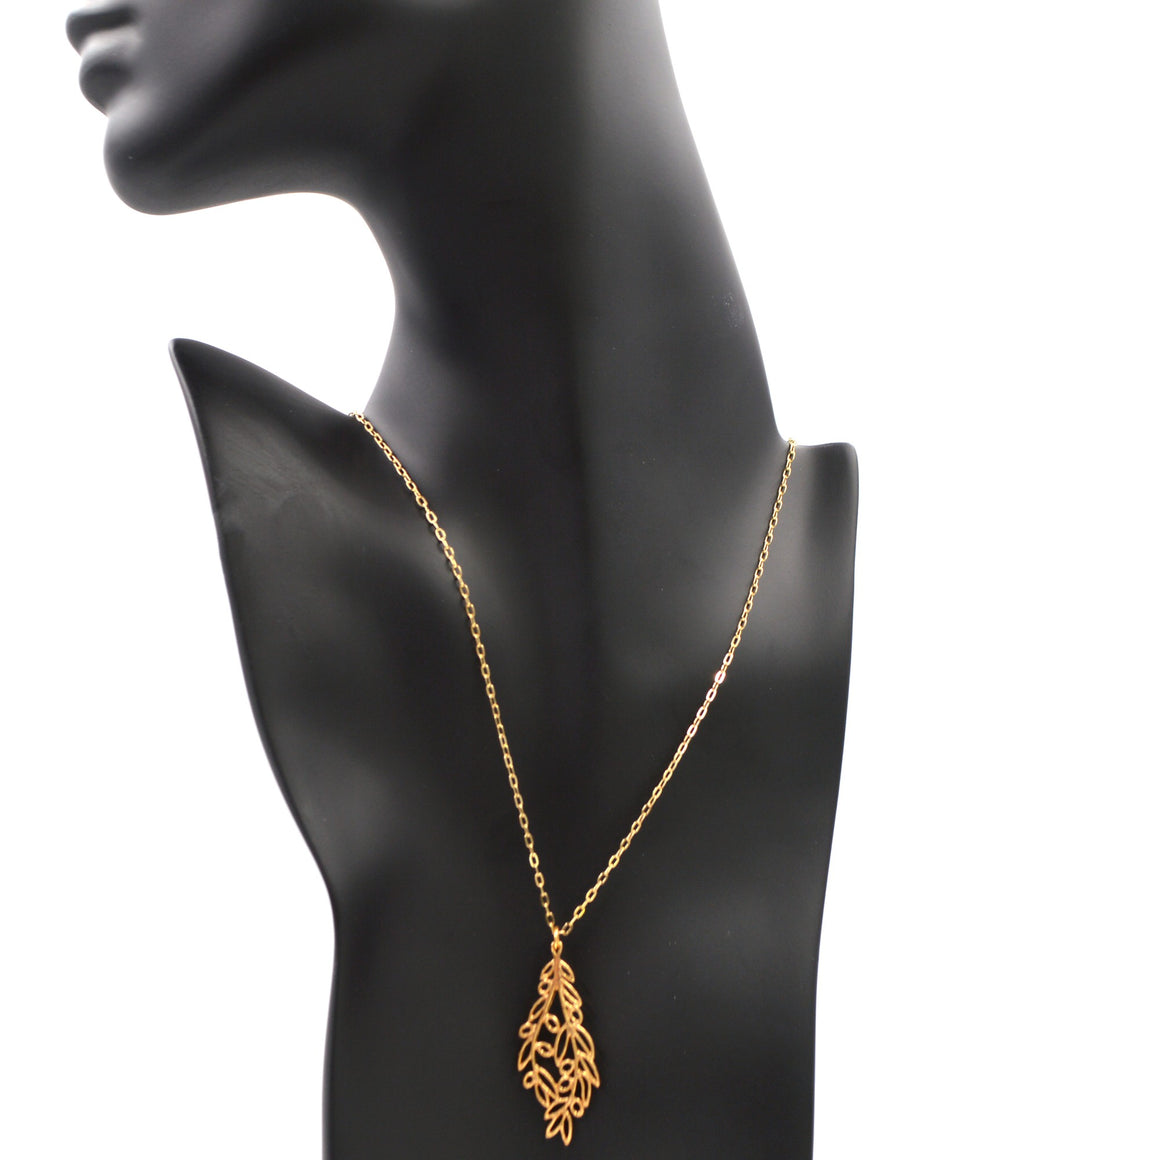 Olive Branch Pendant Necklace - 24K Gold Plated